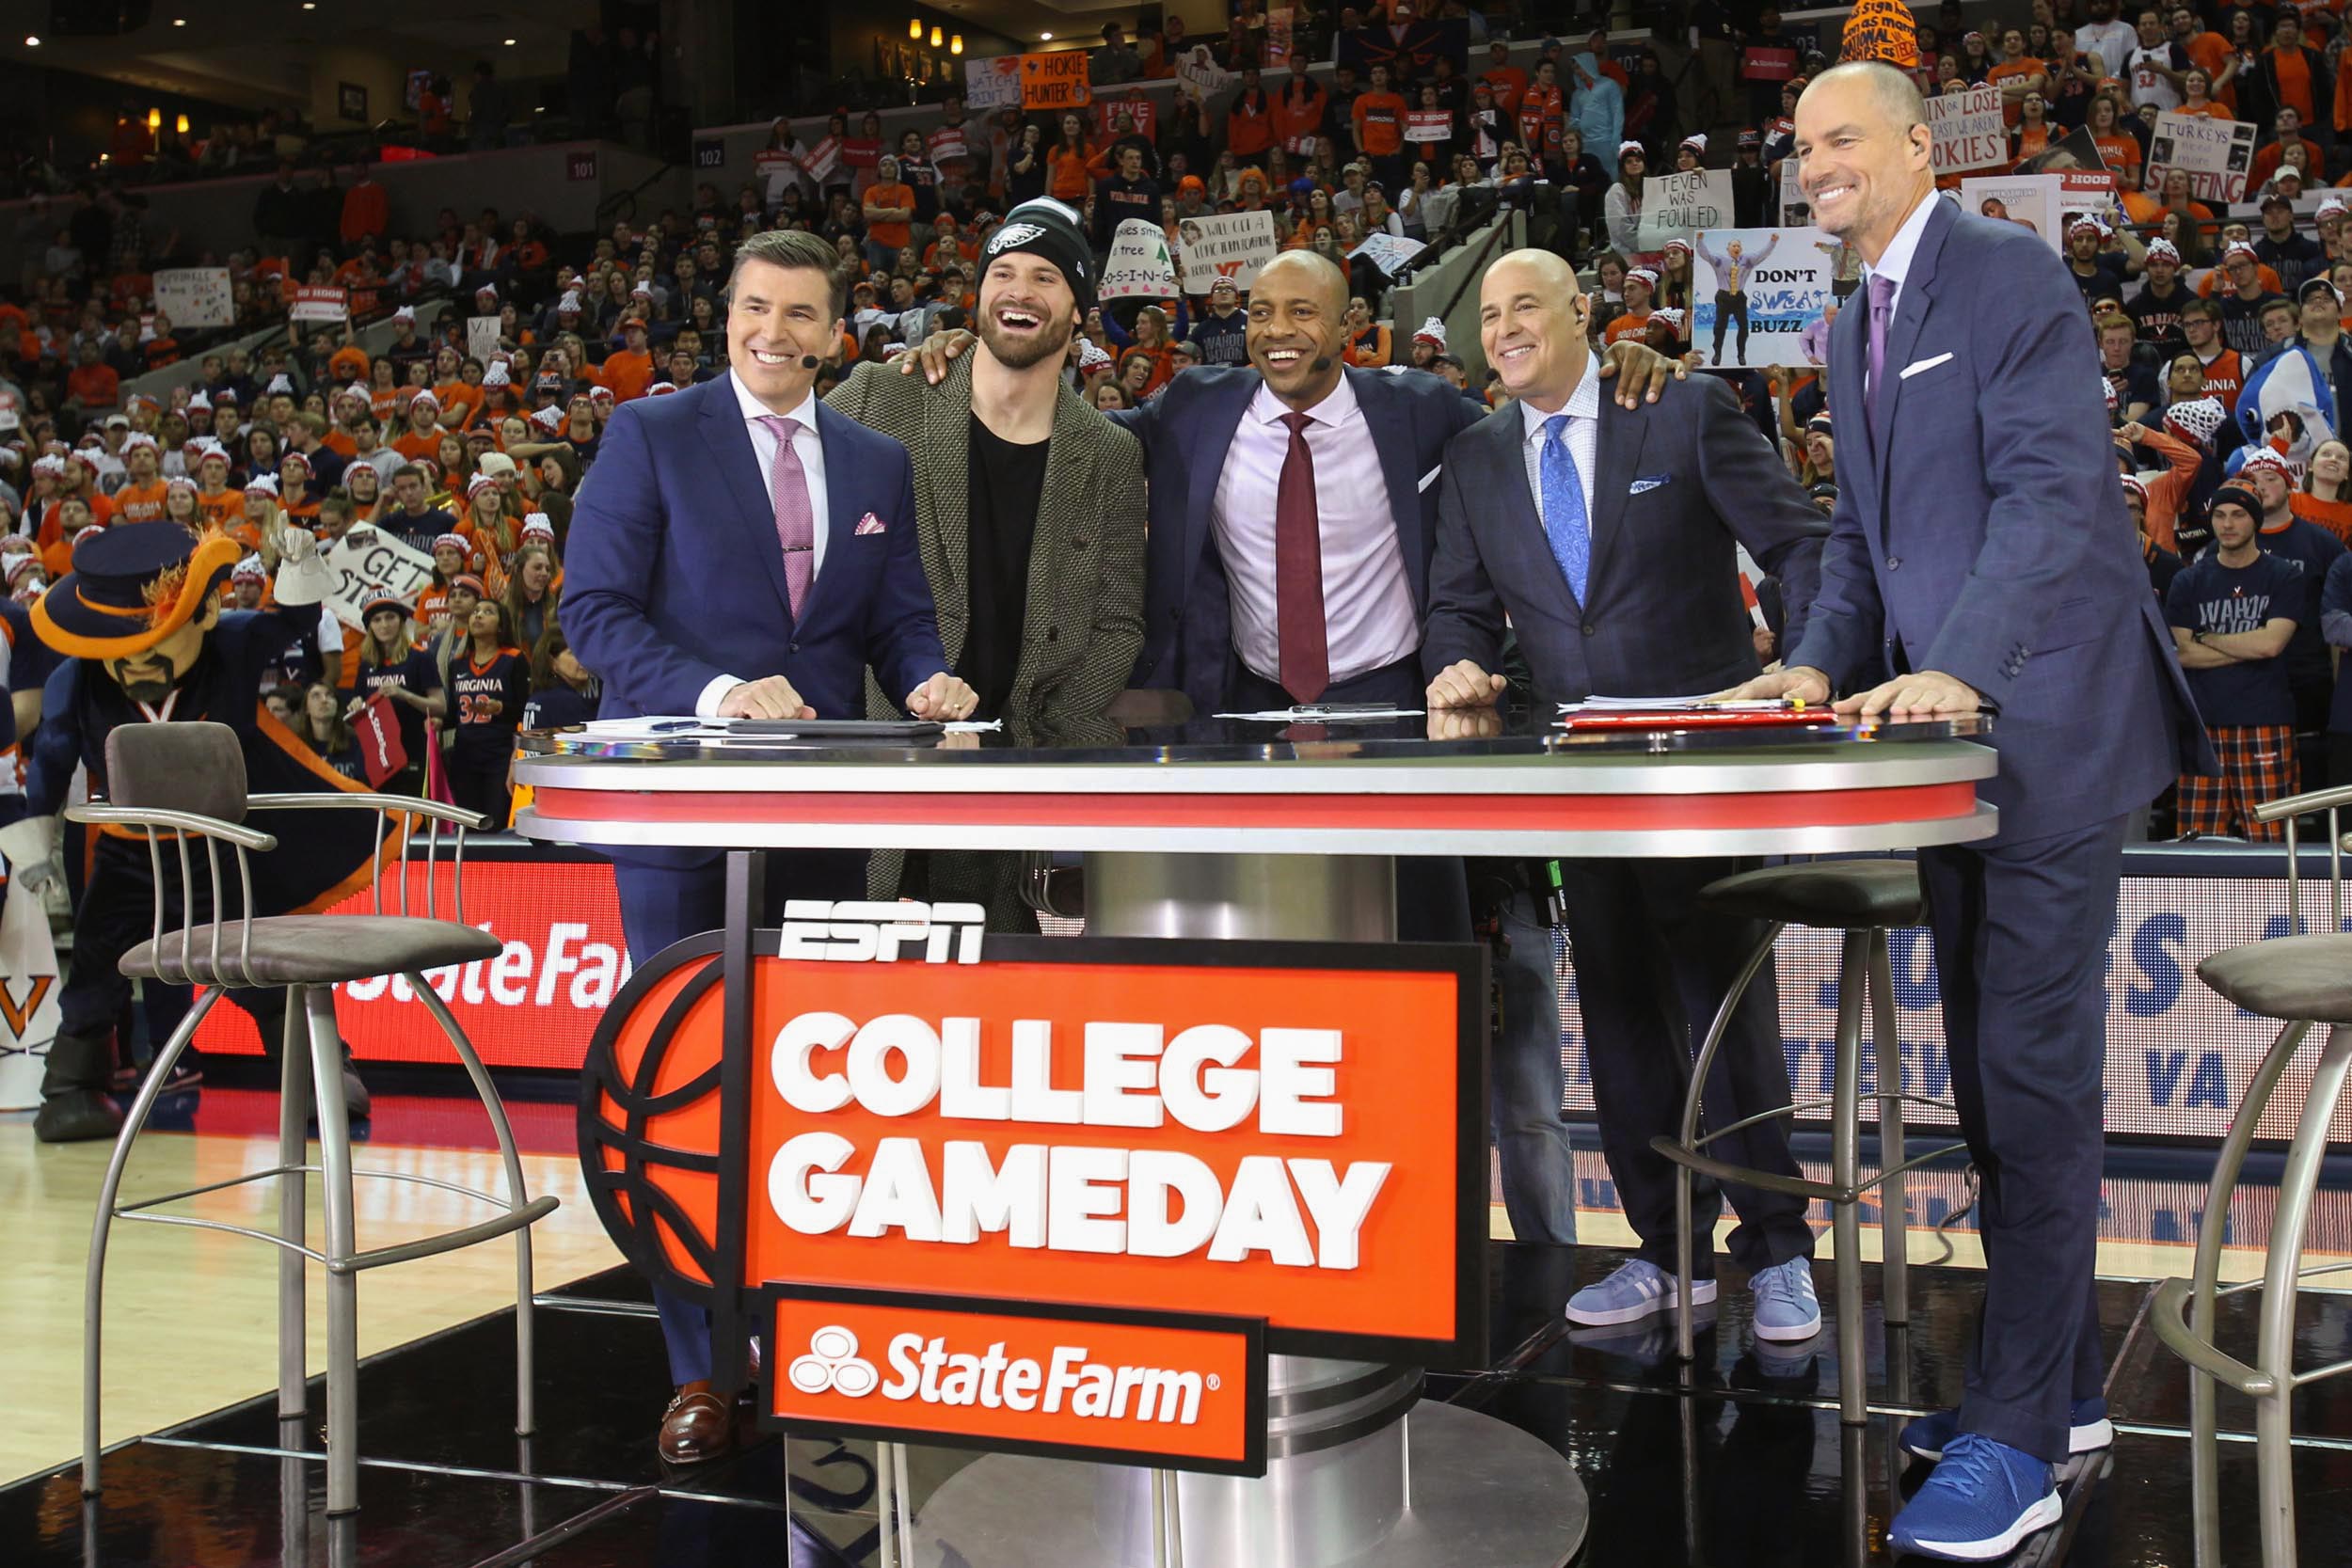 ESPN College Game Day team stands together to take a picture at their desk on the basketball court